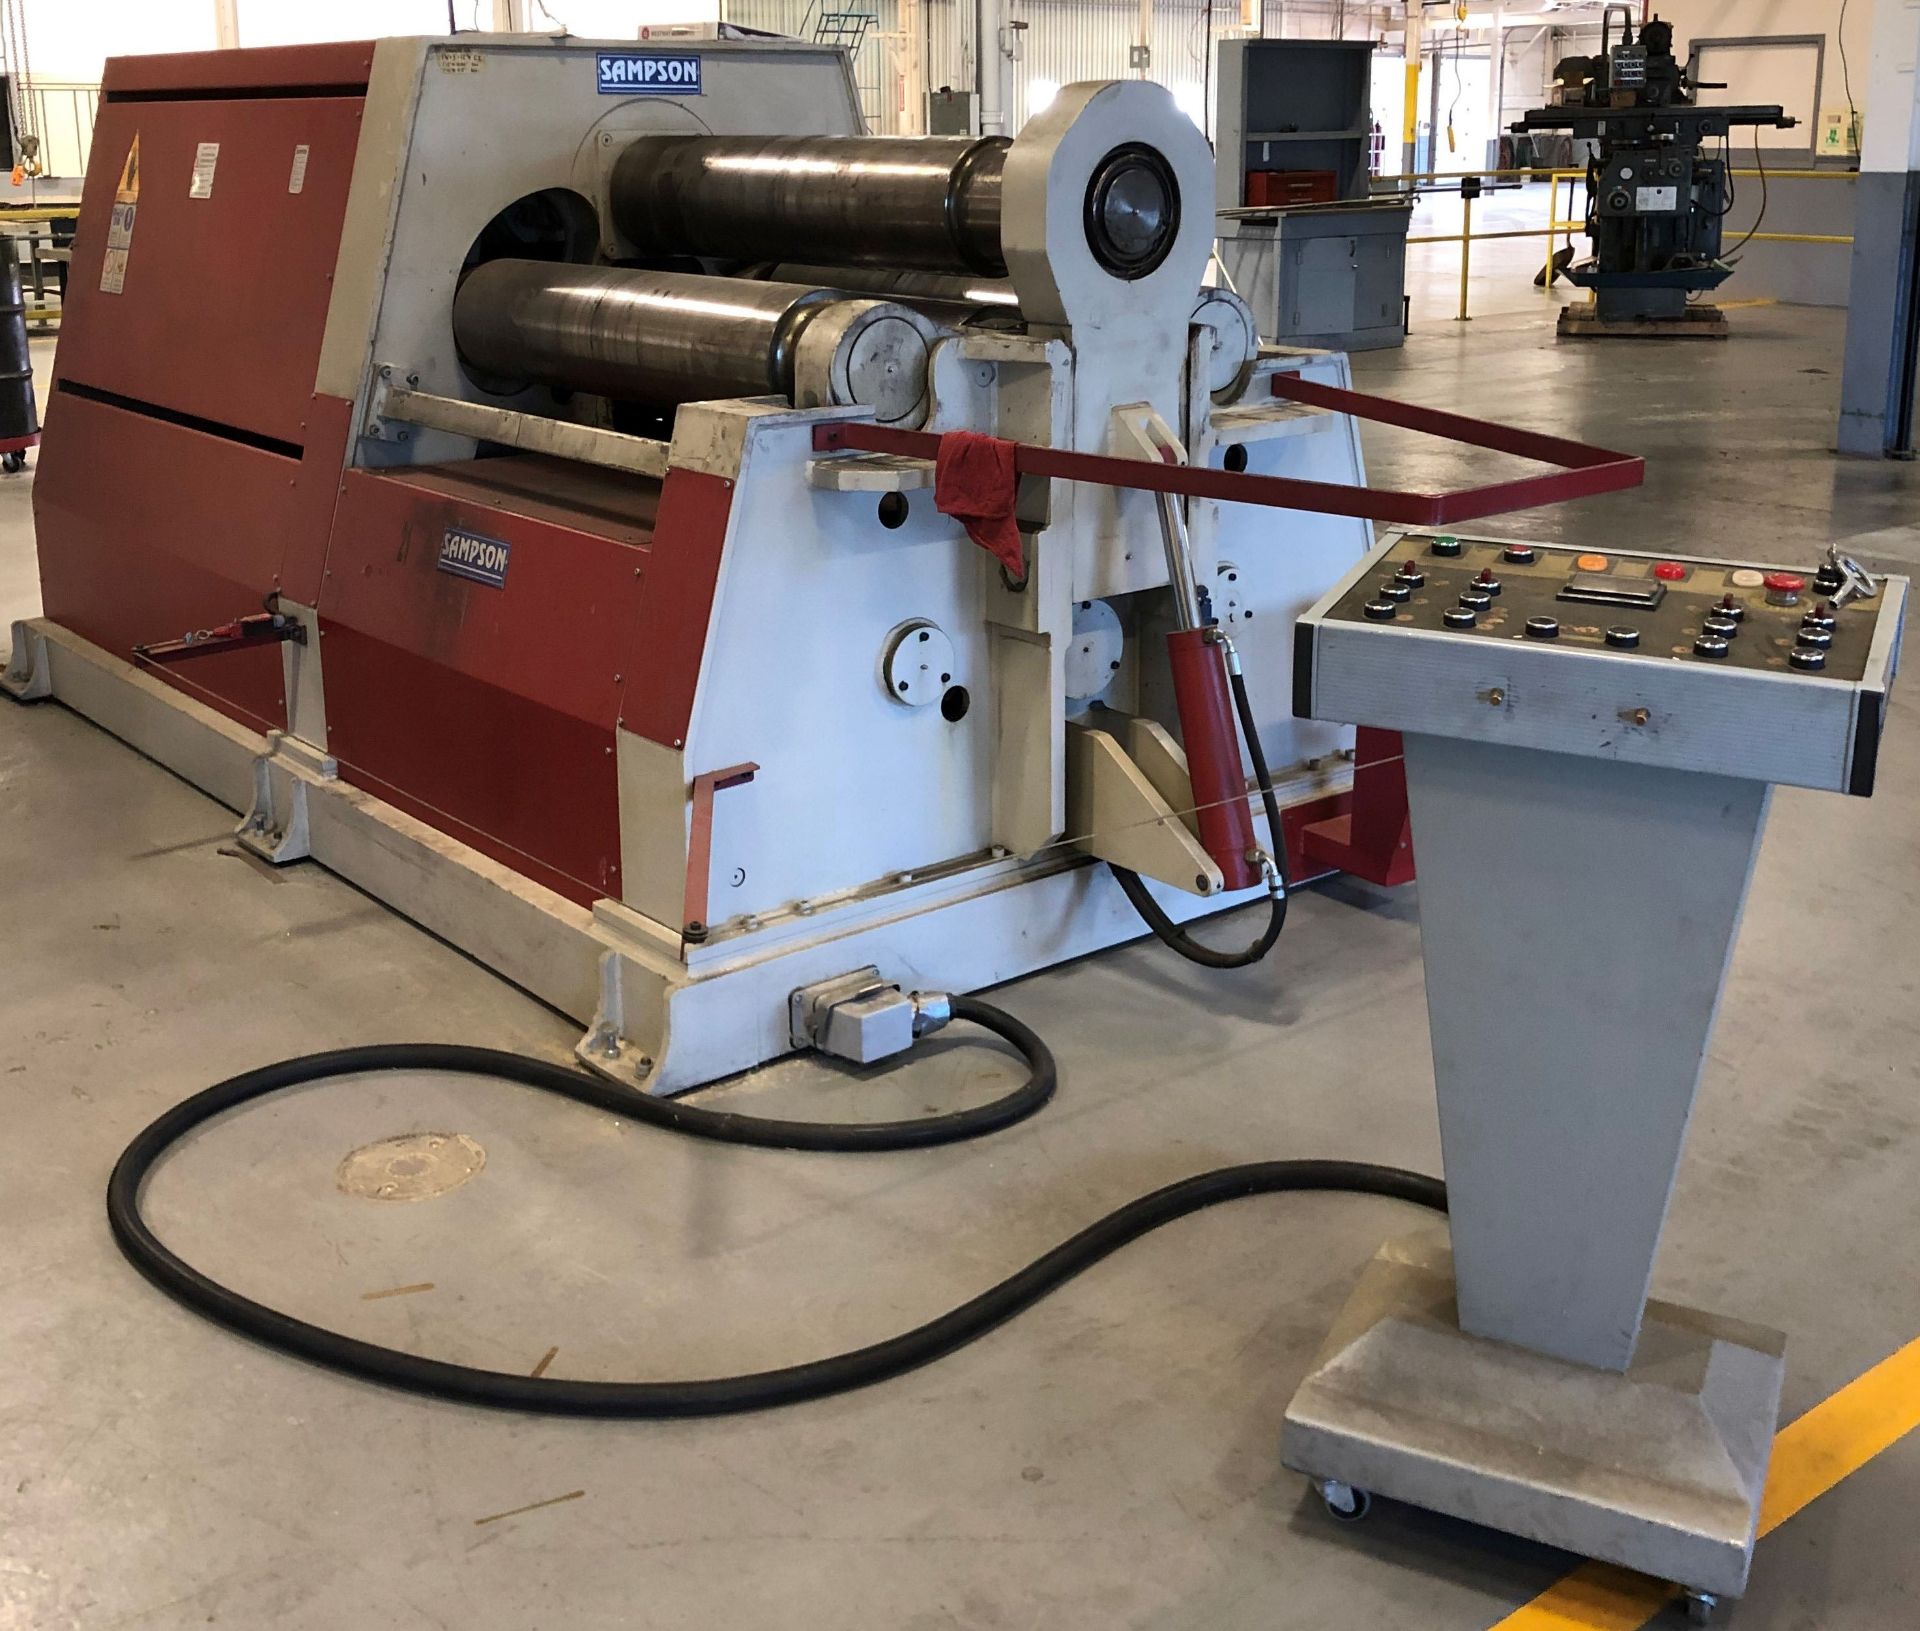 SAMPSON (2010) AHS 10/22, 4 ROLL HYDRAULIC PLATE BENDING ROLLS WITH 4' LENGTH ROLLS, 1" CAPACITY,